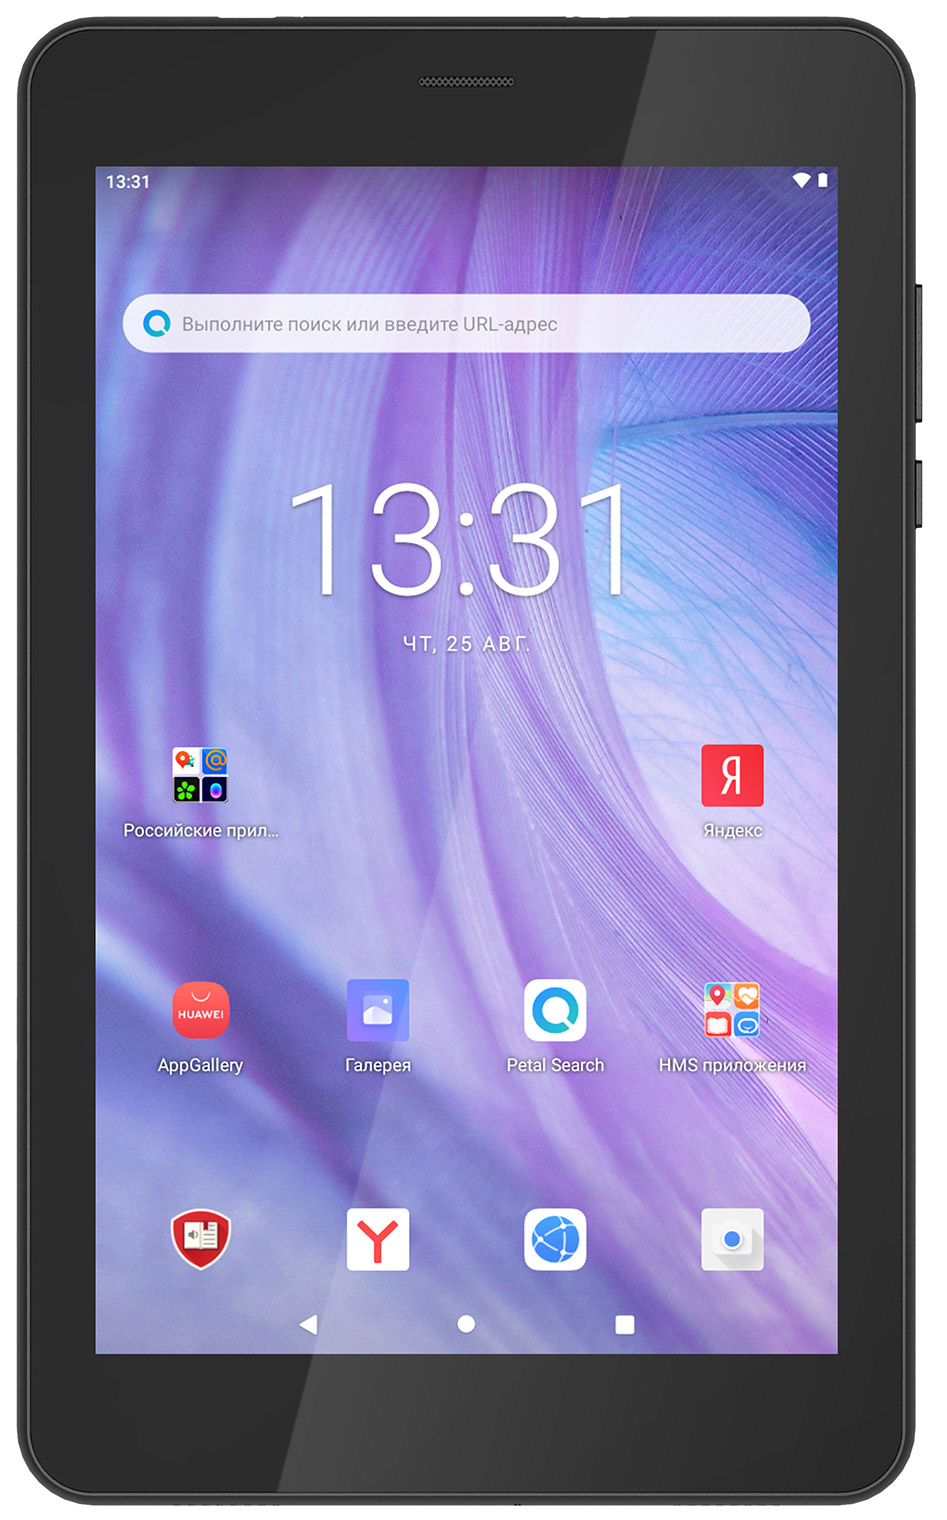 Планшет Top Device Tablet А8 2/32GB черный topdevice tablet a8 8 800x1280 ips 2d g p tp android 11 go edition up to 2 0ghz 4 core unisoc tiger t310 2 32gb 4g gps bt 5 0 wifi